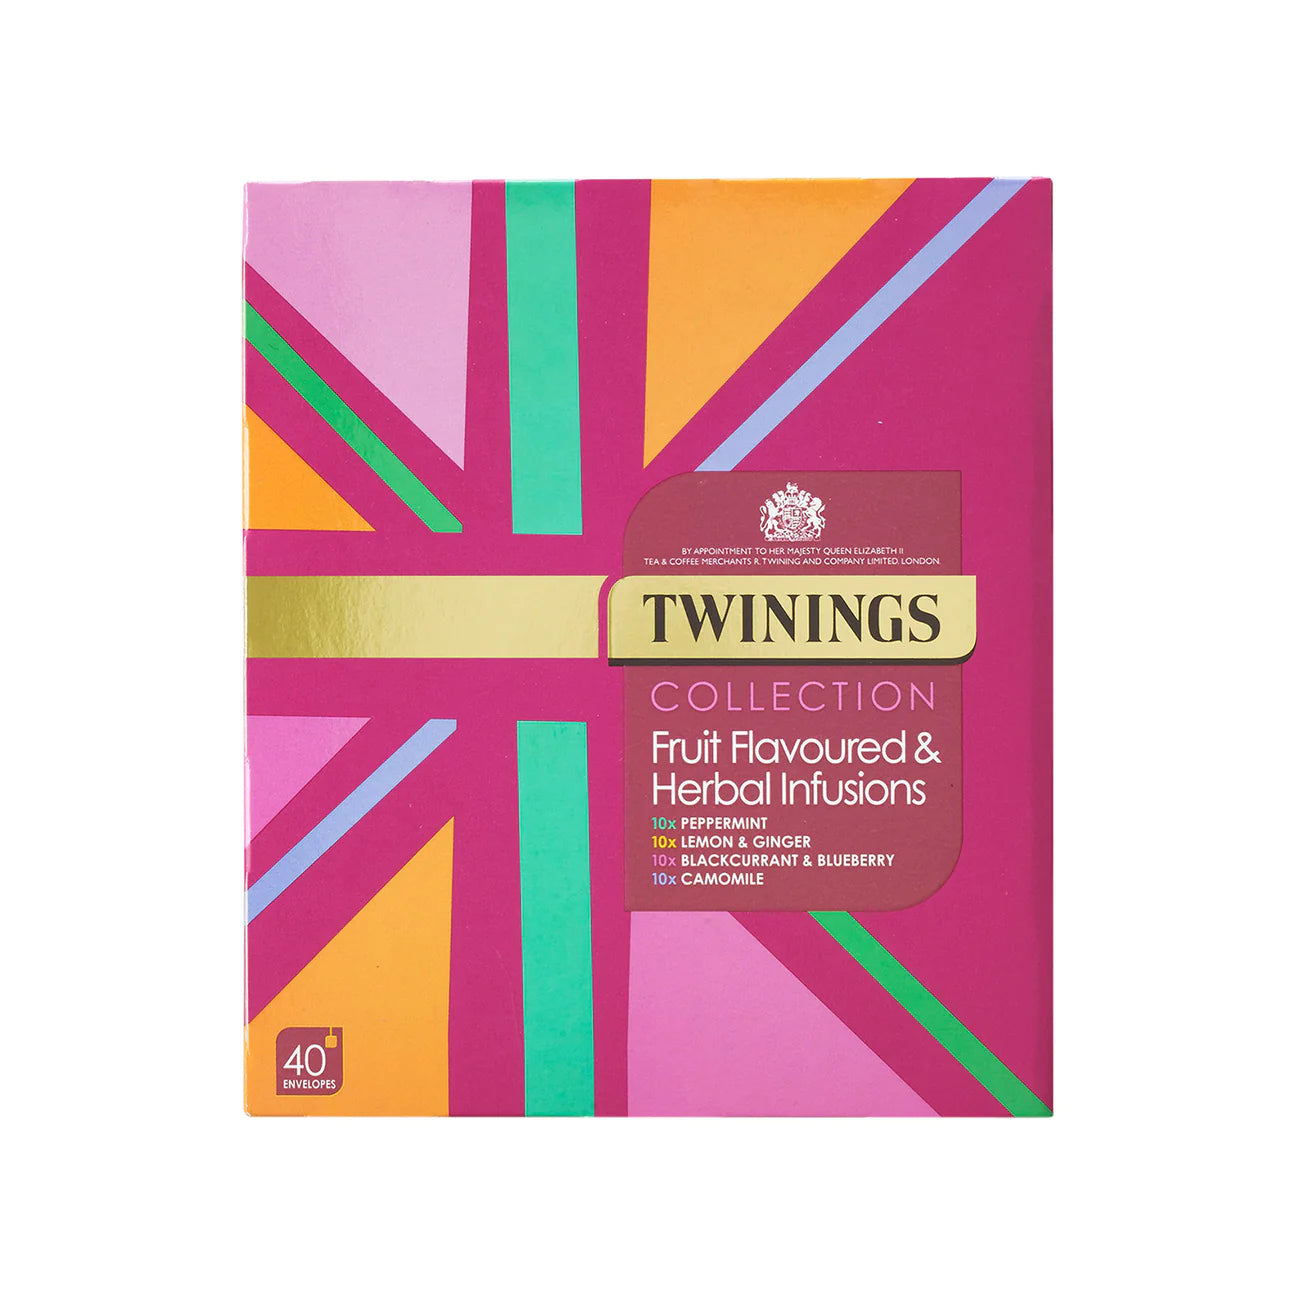 Twinings Fruit Flavoured & Herbal Infusions Gift Box (40 Envelopes) - Vending Superstore